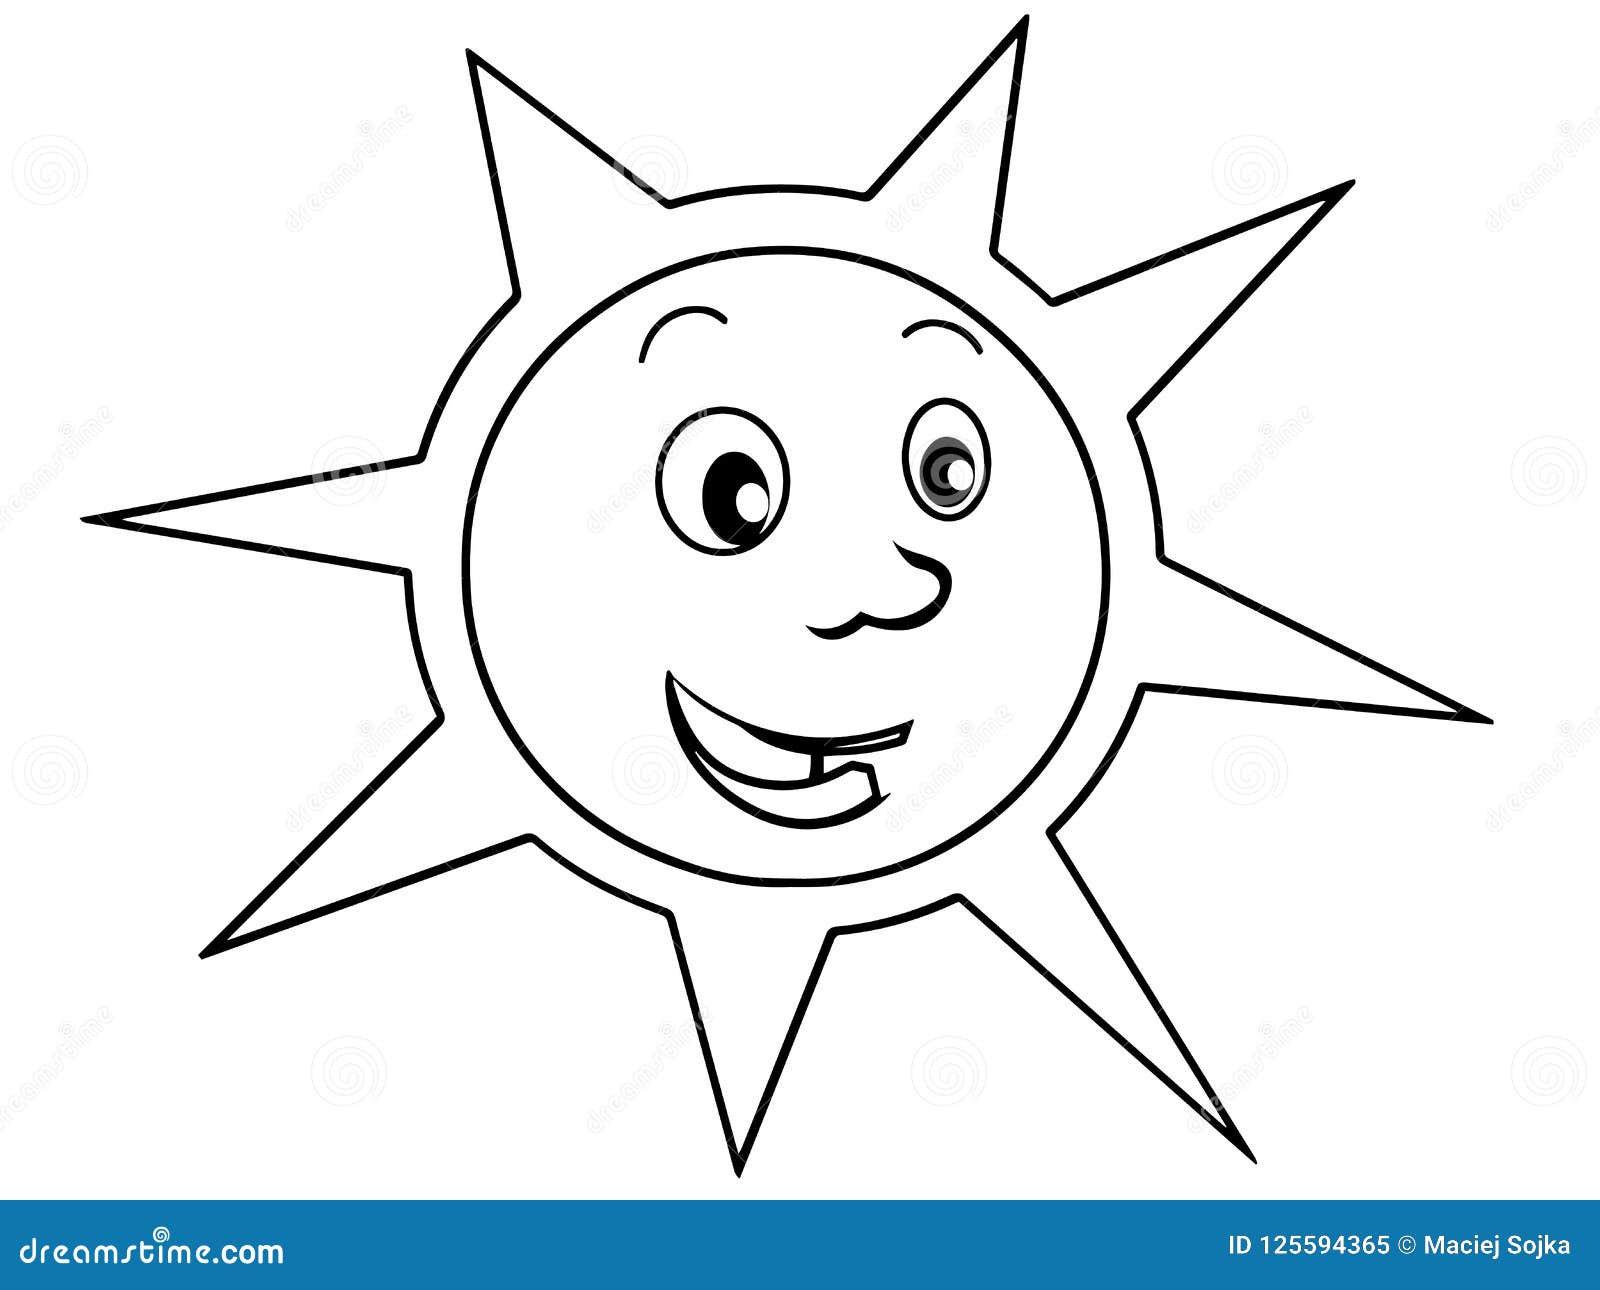 Download Cartoon Scene With Happy And Funny Sun - Coloring Page Stock Vector - Illustration of clipart ...